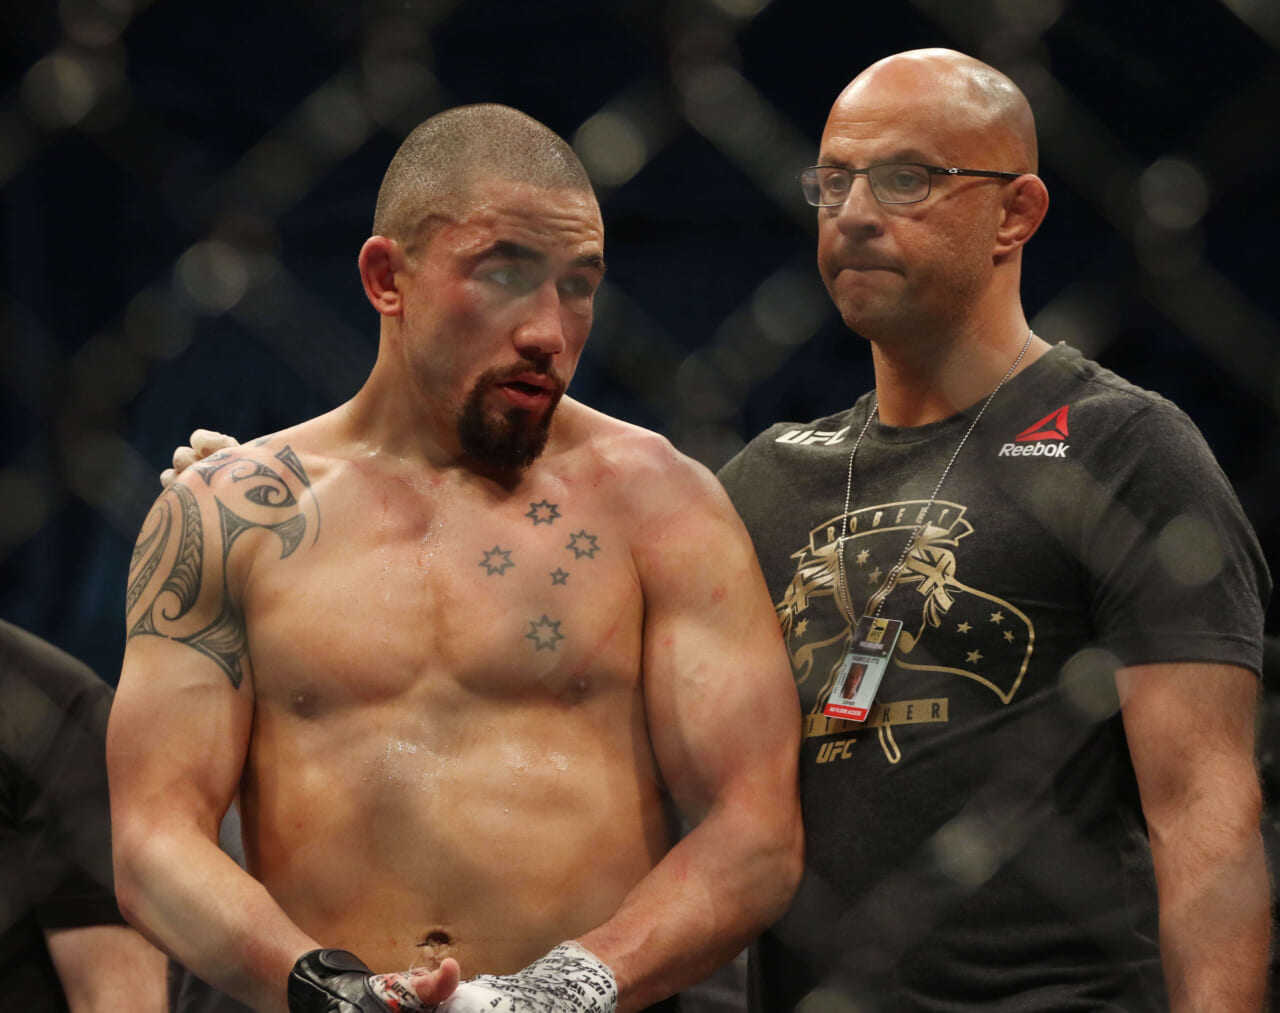 UFC Fight Island 3 Preview: Whittaker and Till look to cement top contender status